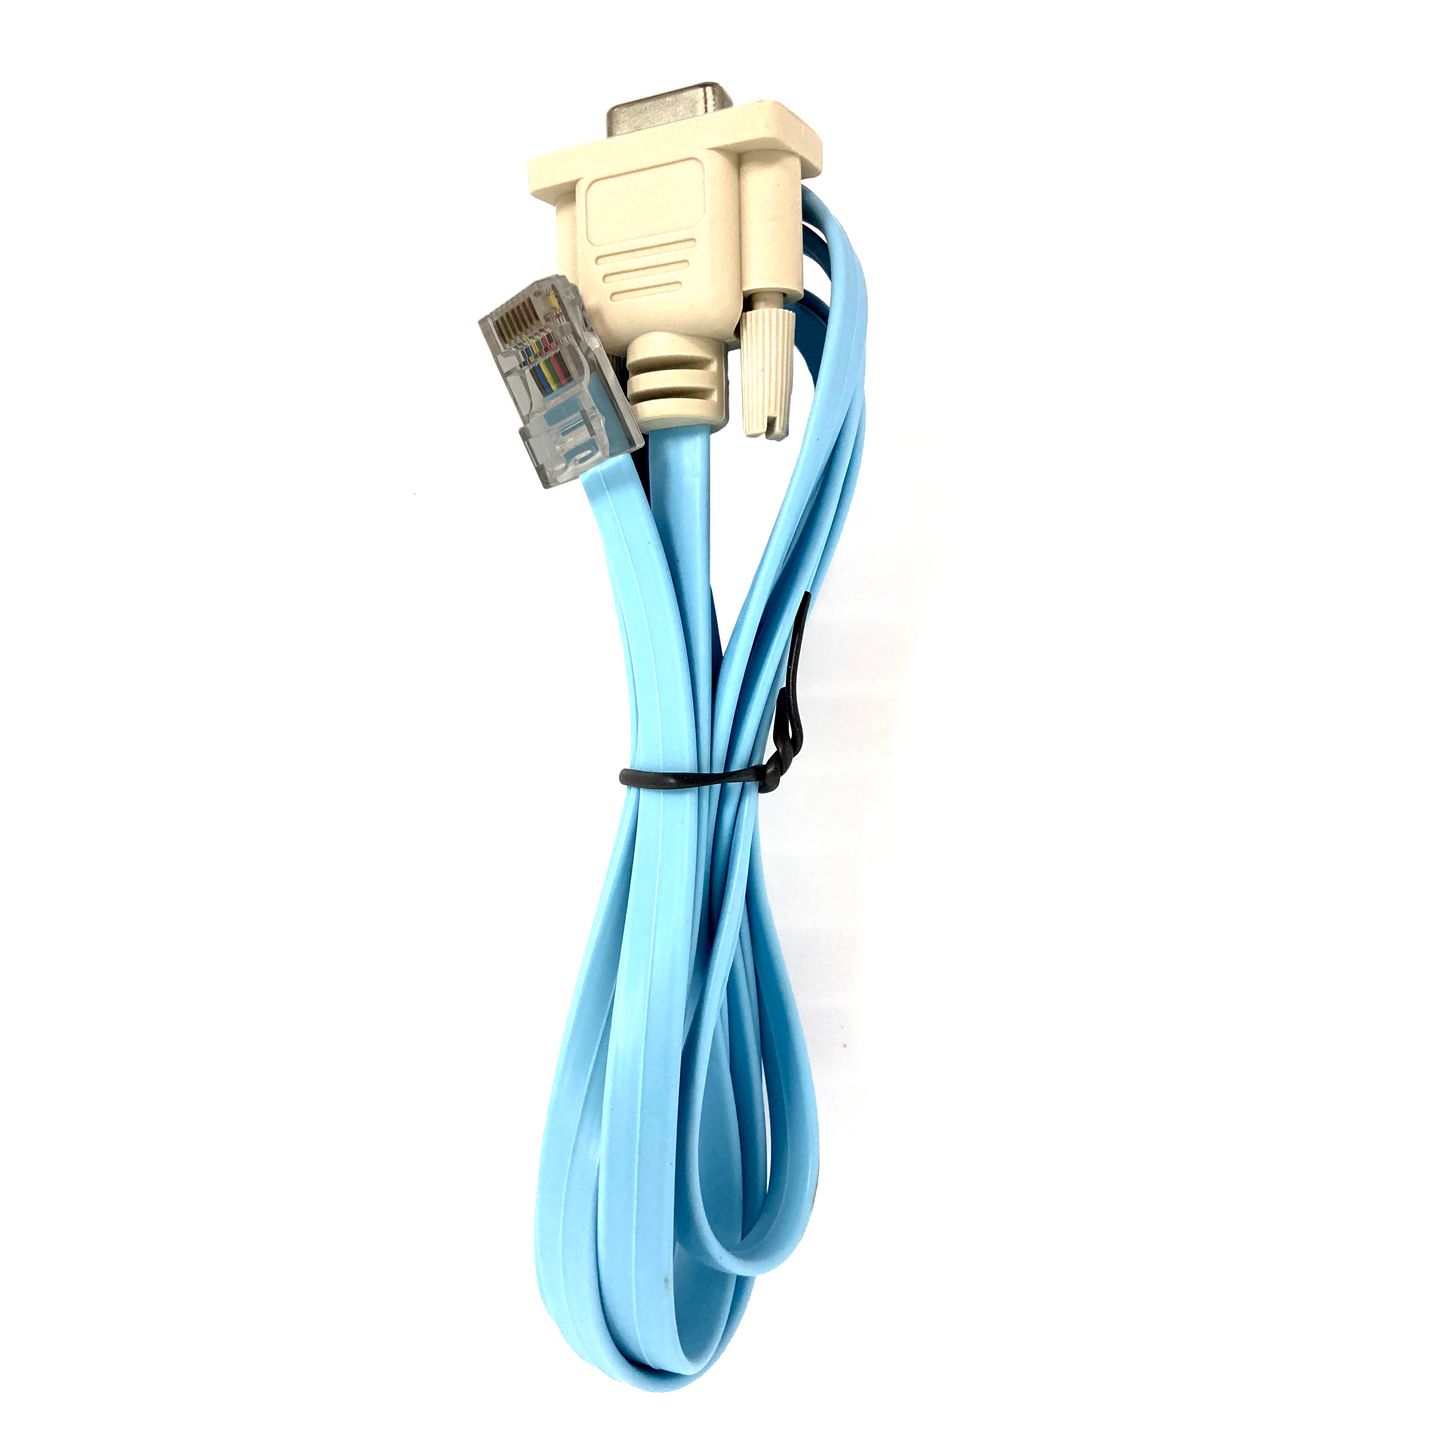 The Serial Touch Cable runs from the motherboard to the I/O Board responsible for registering touch. Sold by Miele Manufacturing.